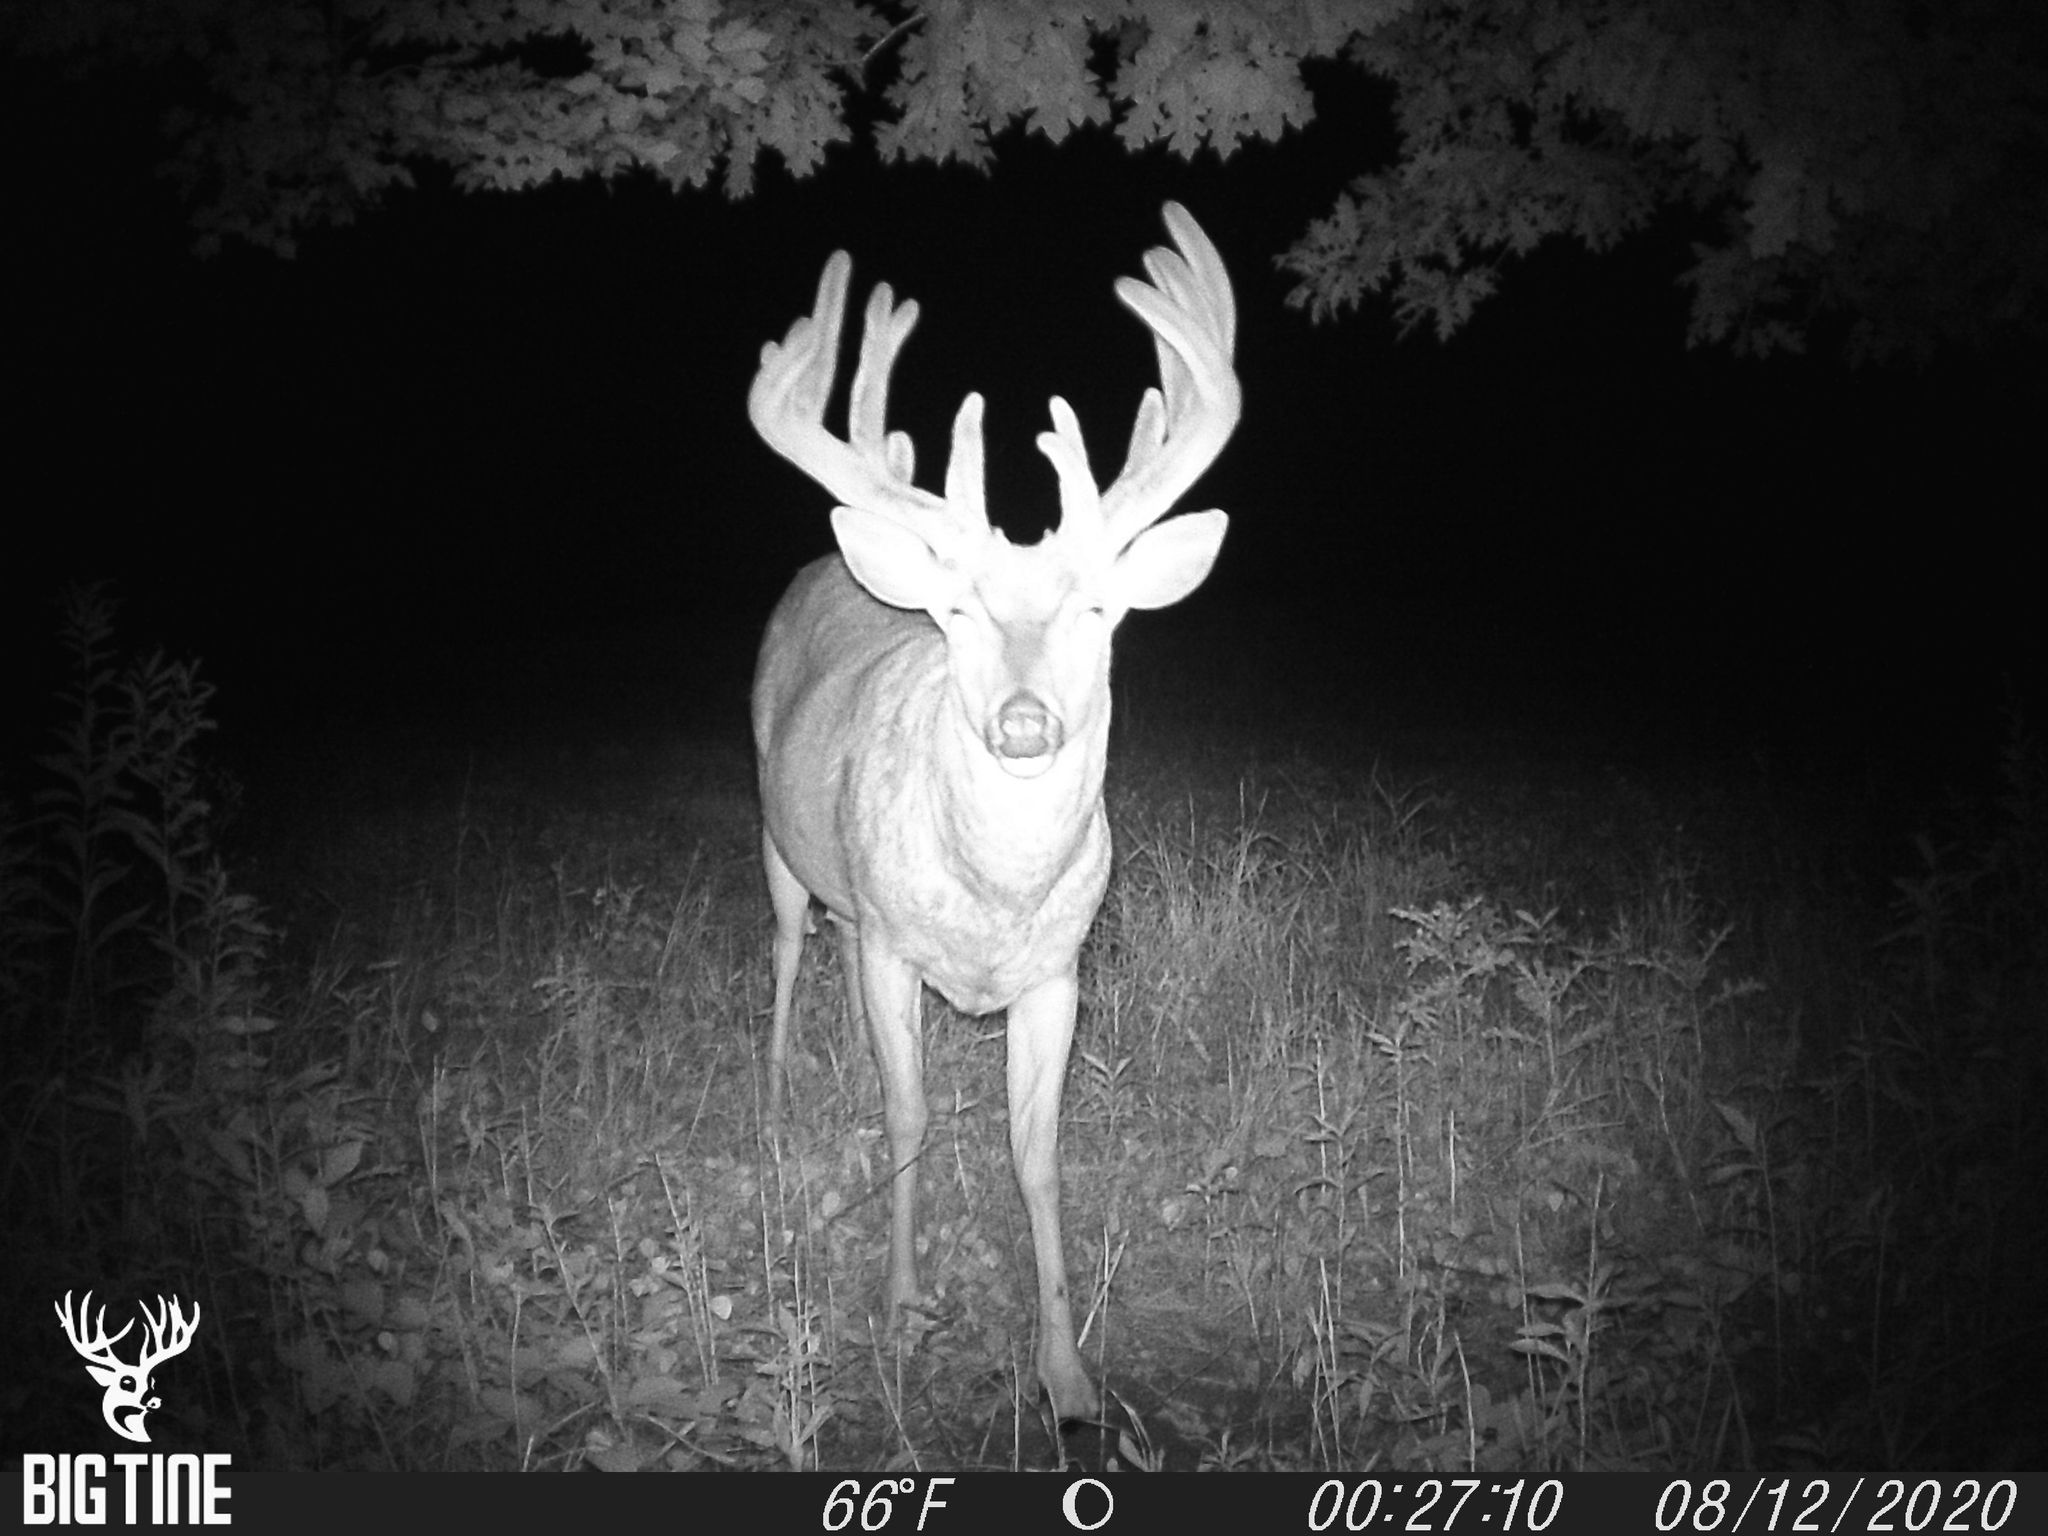 Trail camera photo in black and white of a big buck in velvet.